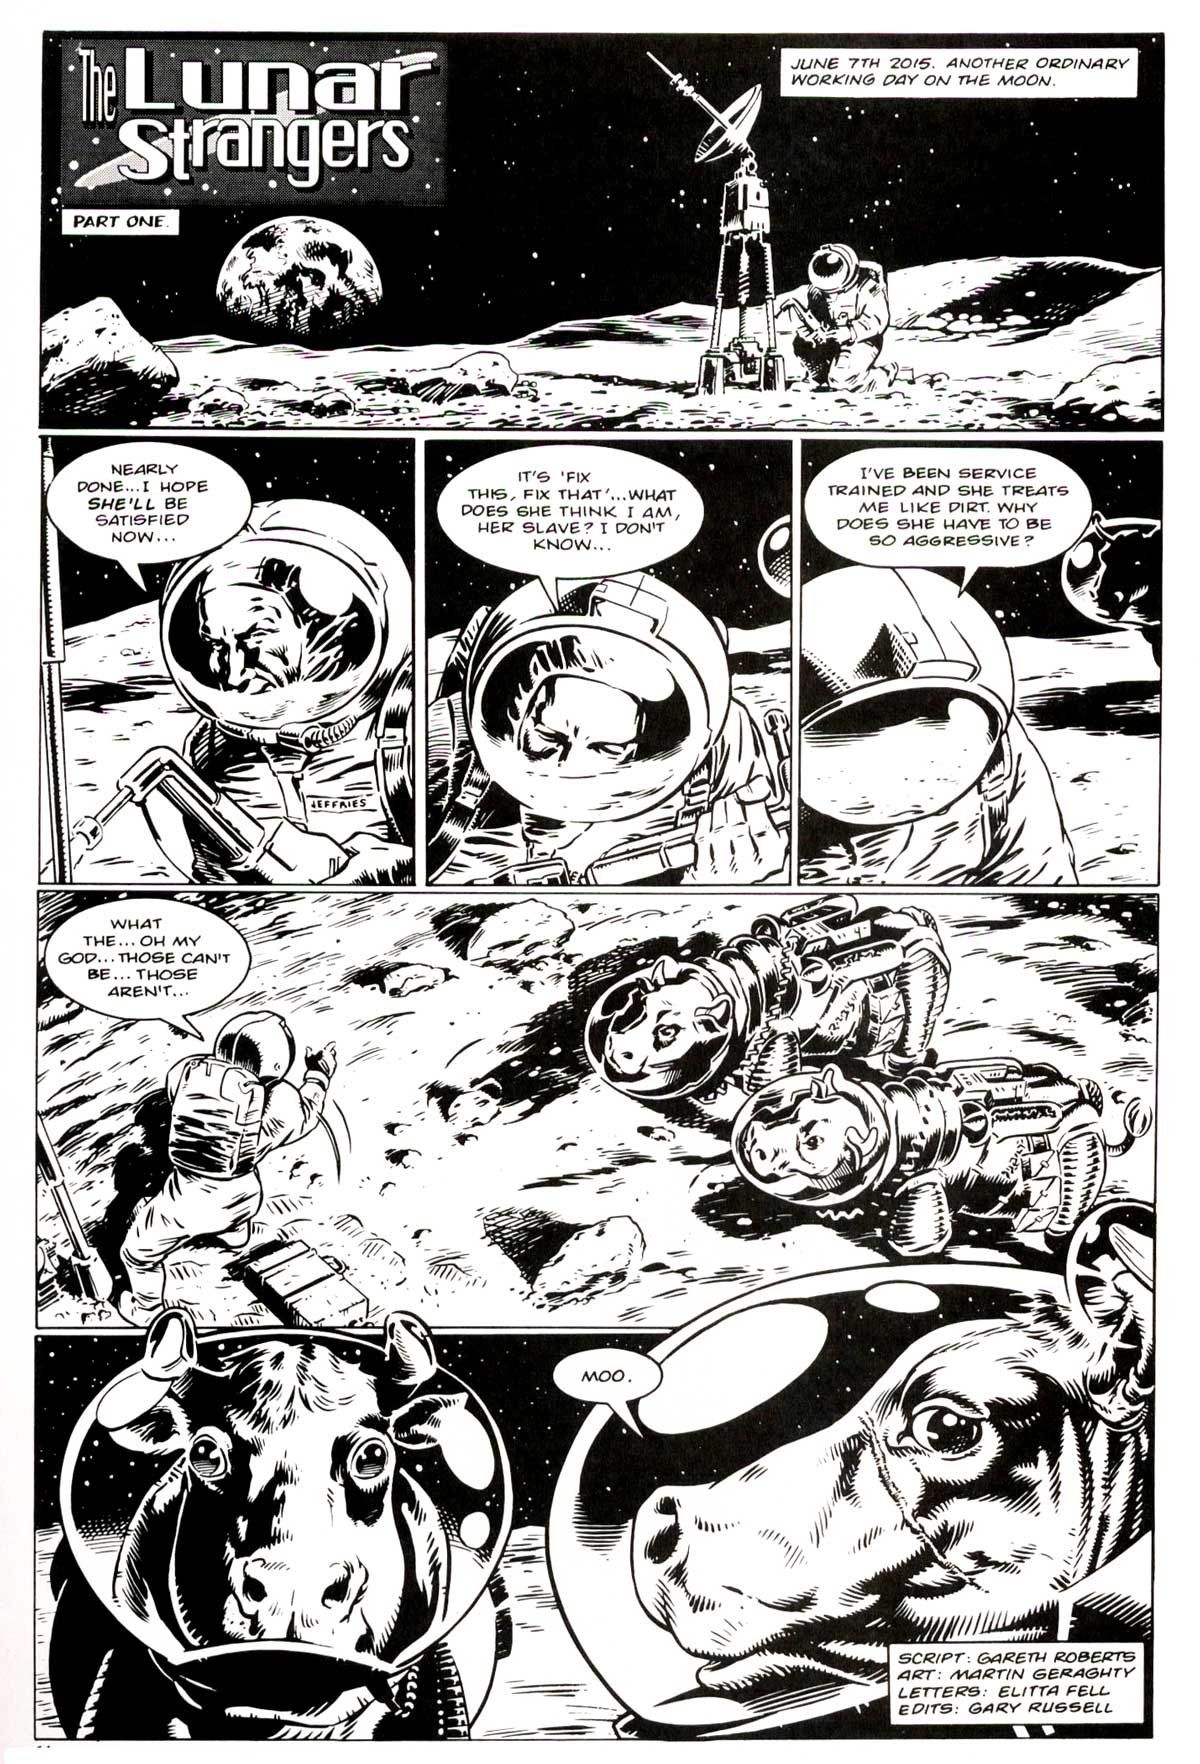 "The Lunar Strangers", a Fifth Doctor story by Gareth Roberts, drawn by Martin Geraghty